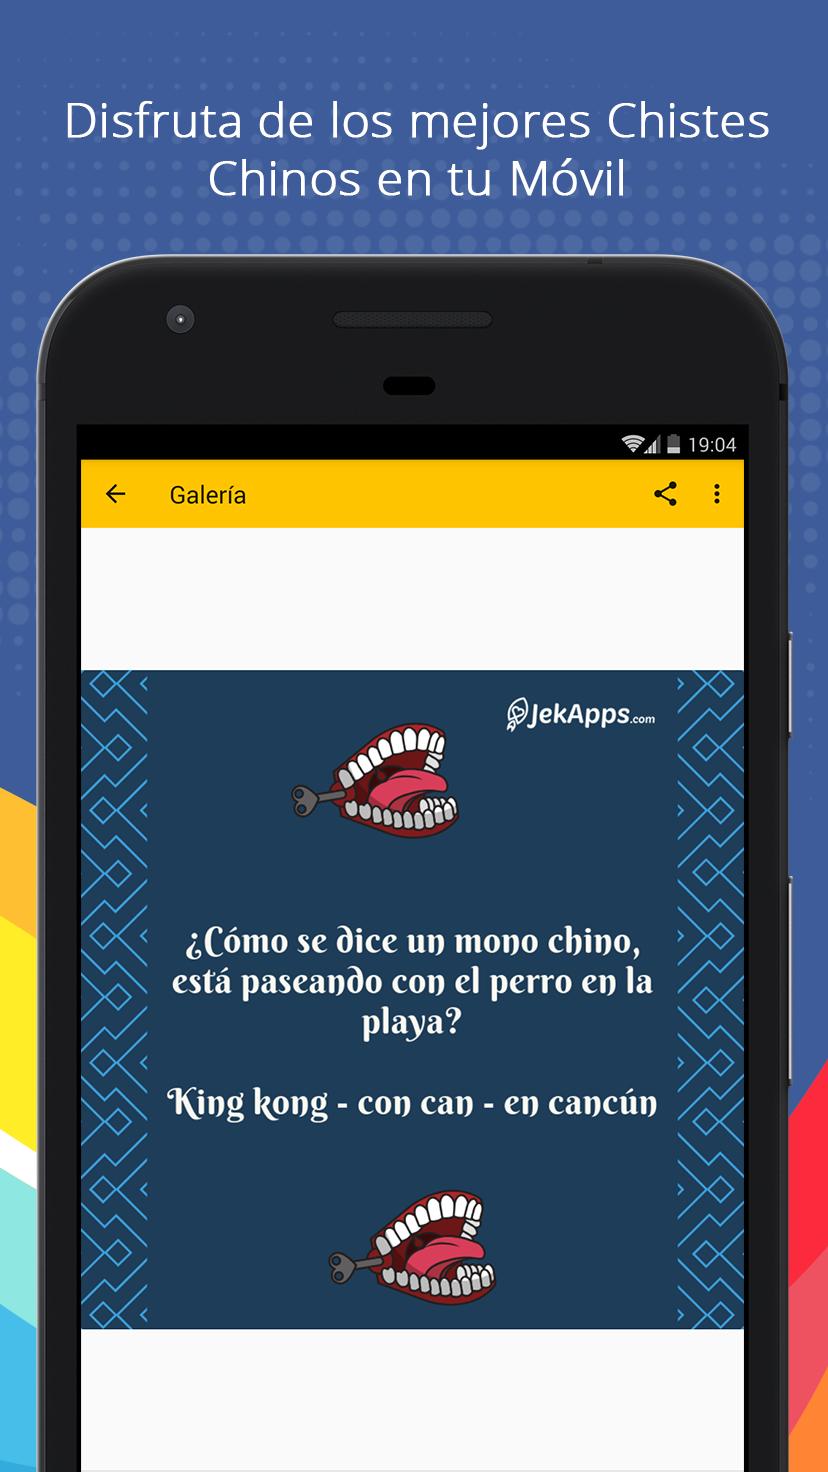 Chistes de Chinos for Android - APK Download